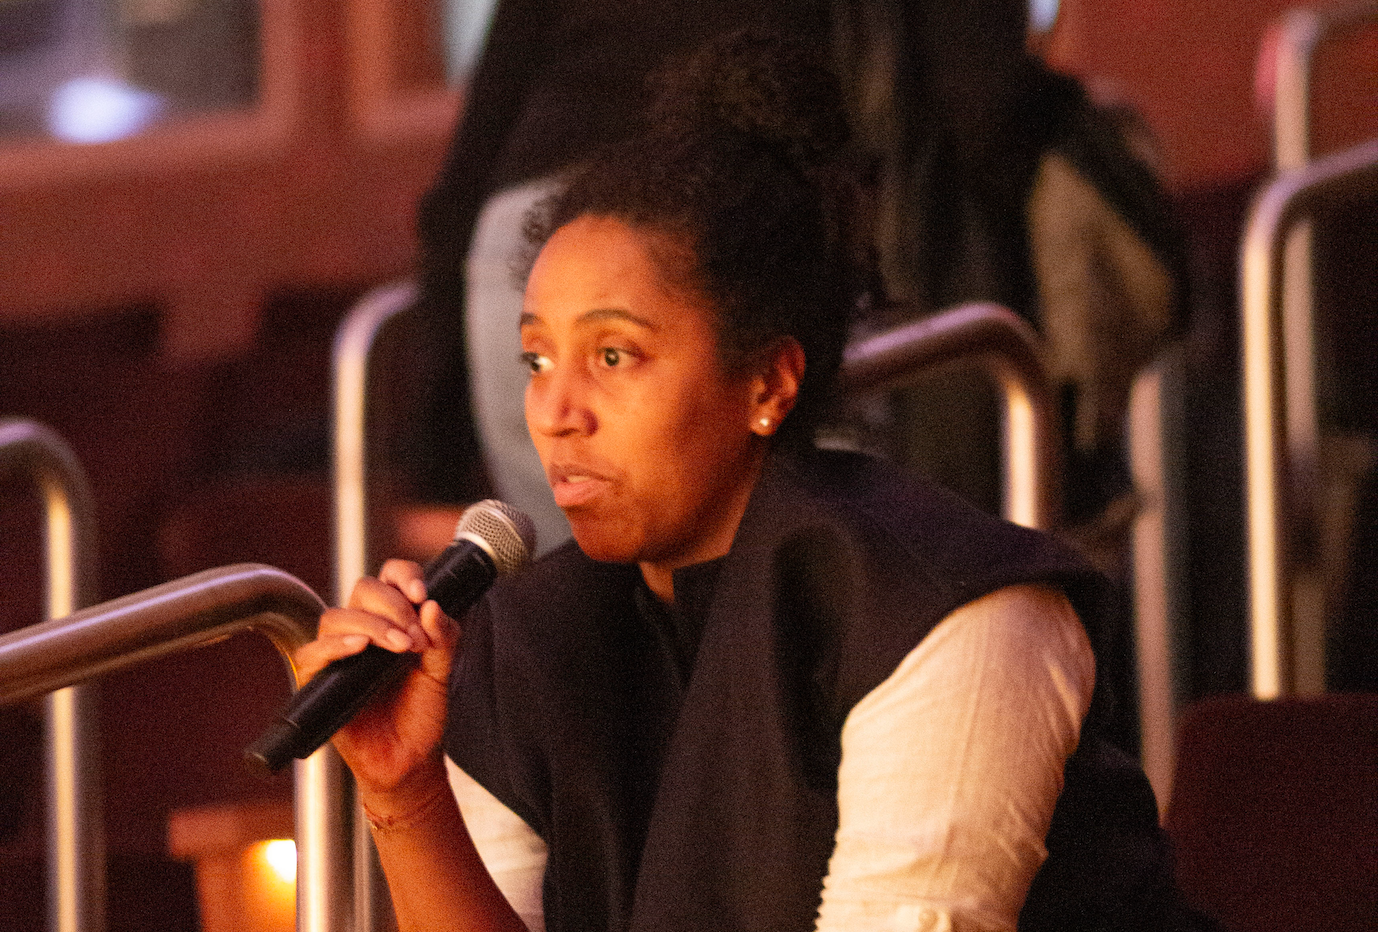 A middle-aged black woman, holding a microphone, asks Alice Diop a question during the Q+A portion of the event.